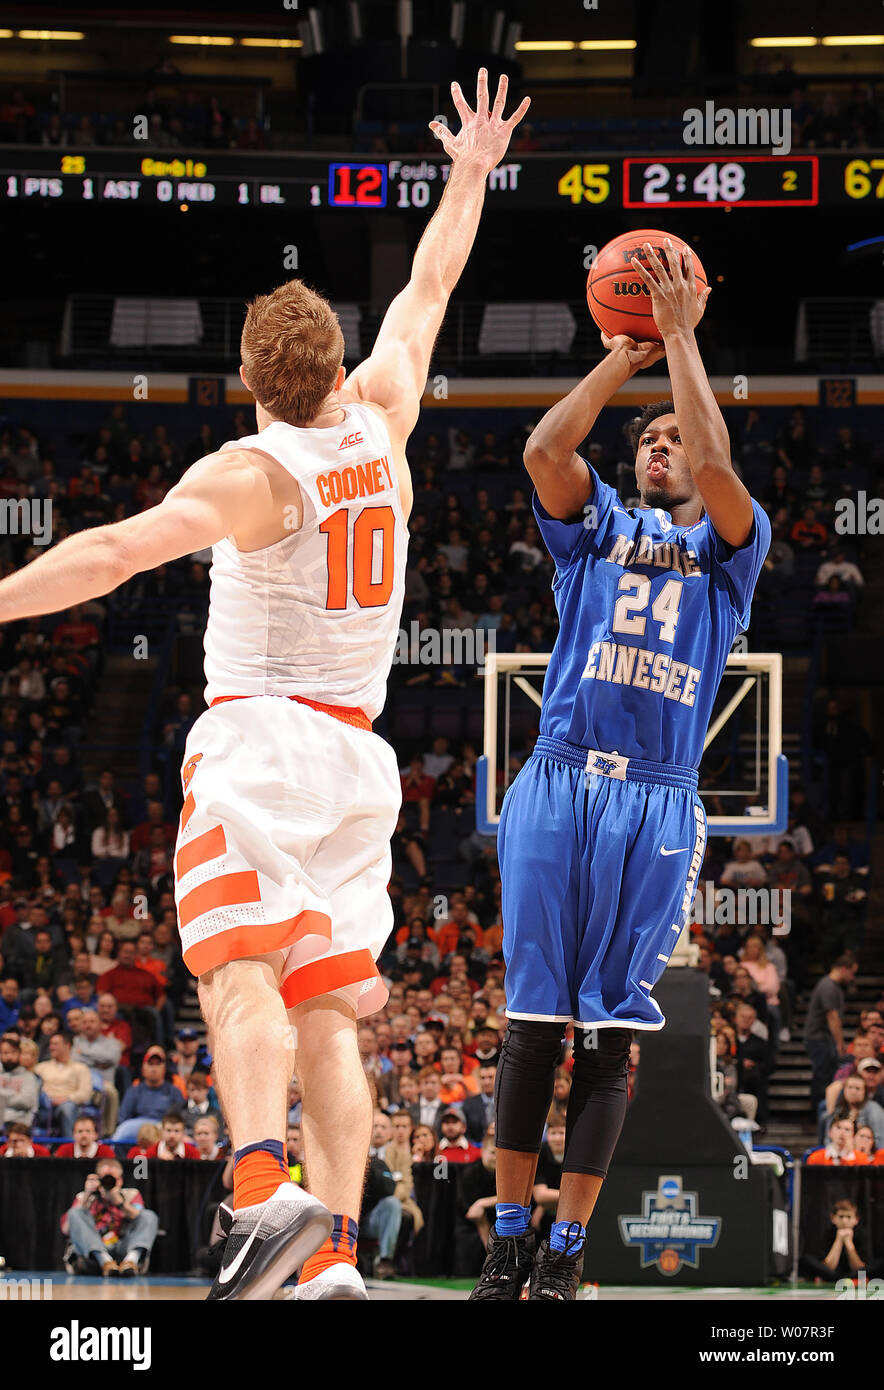 Middle Tennessee's guard Quavius Copeland shoots over Syracuse guard Trevor Cooney during the second half of play in the NCAA Division 1 Men's Basketball Championship at the Scottrade Center in St. Louis on March 20, 2016. Syracuse defeated Middle Tennessee 75-50.      Photo by Doug Devoe/UPI Stock Photo